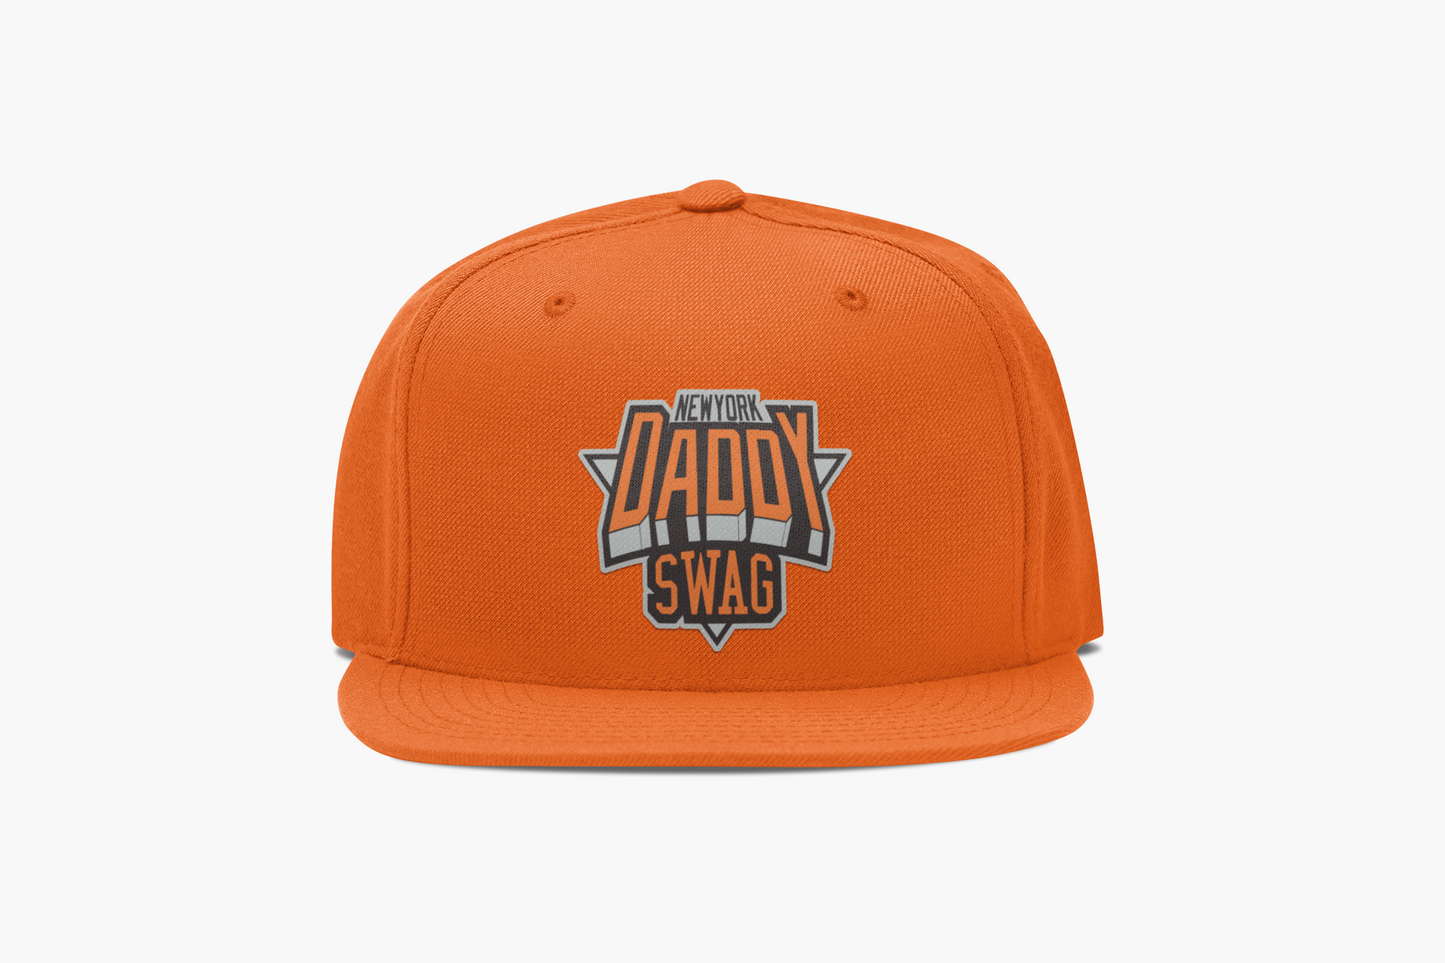 Daddy Swag New York Edition Snap-Back Hat